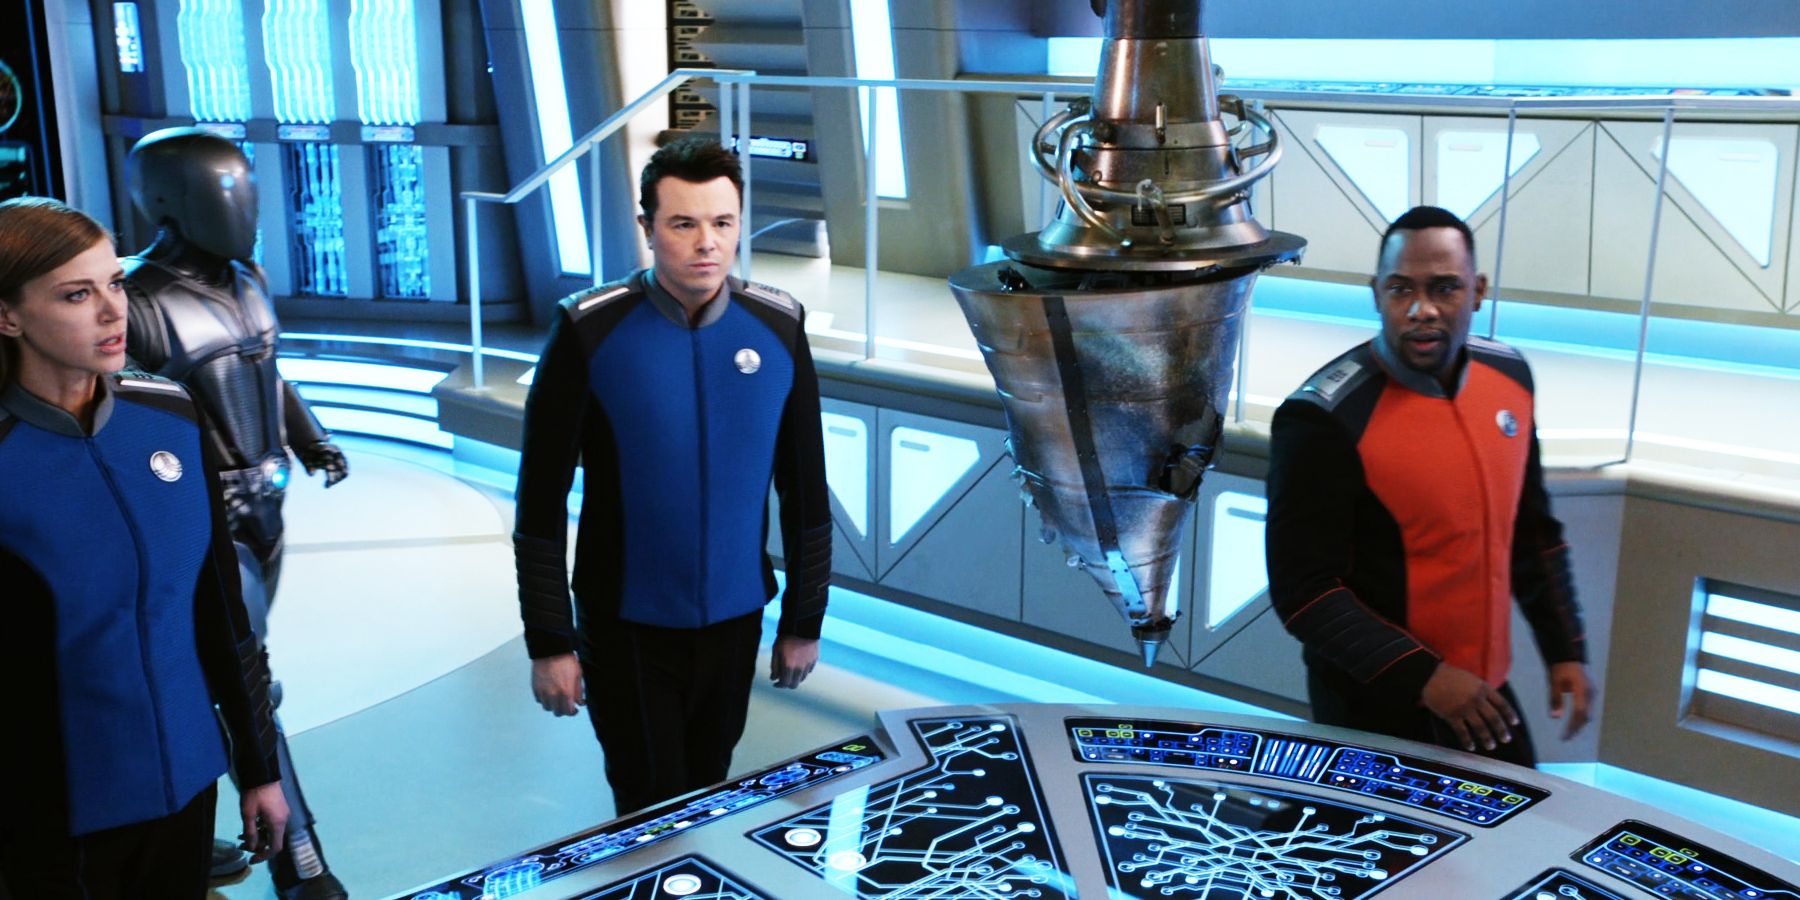 The crew of the Orville survey the damaged Aramov device in The Orville Season 3 Episode 6